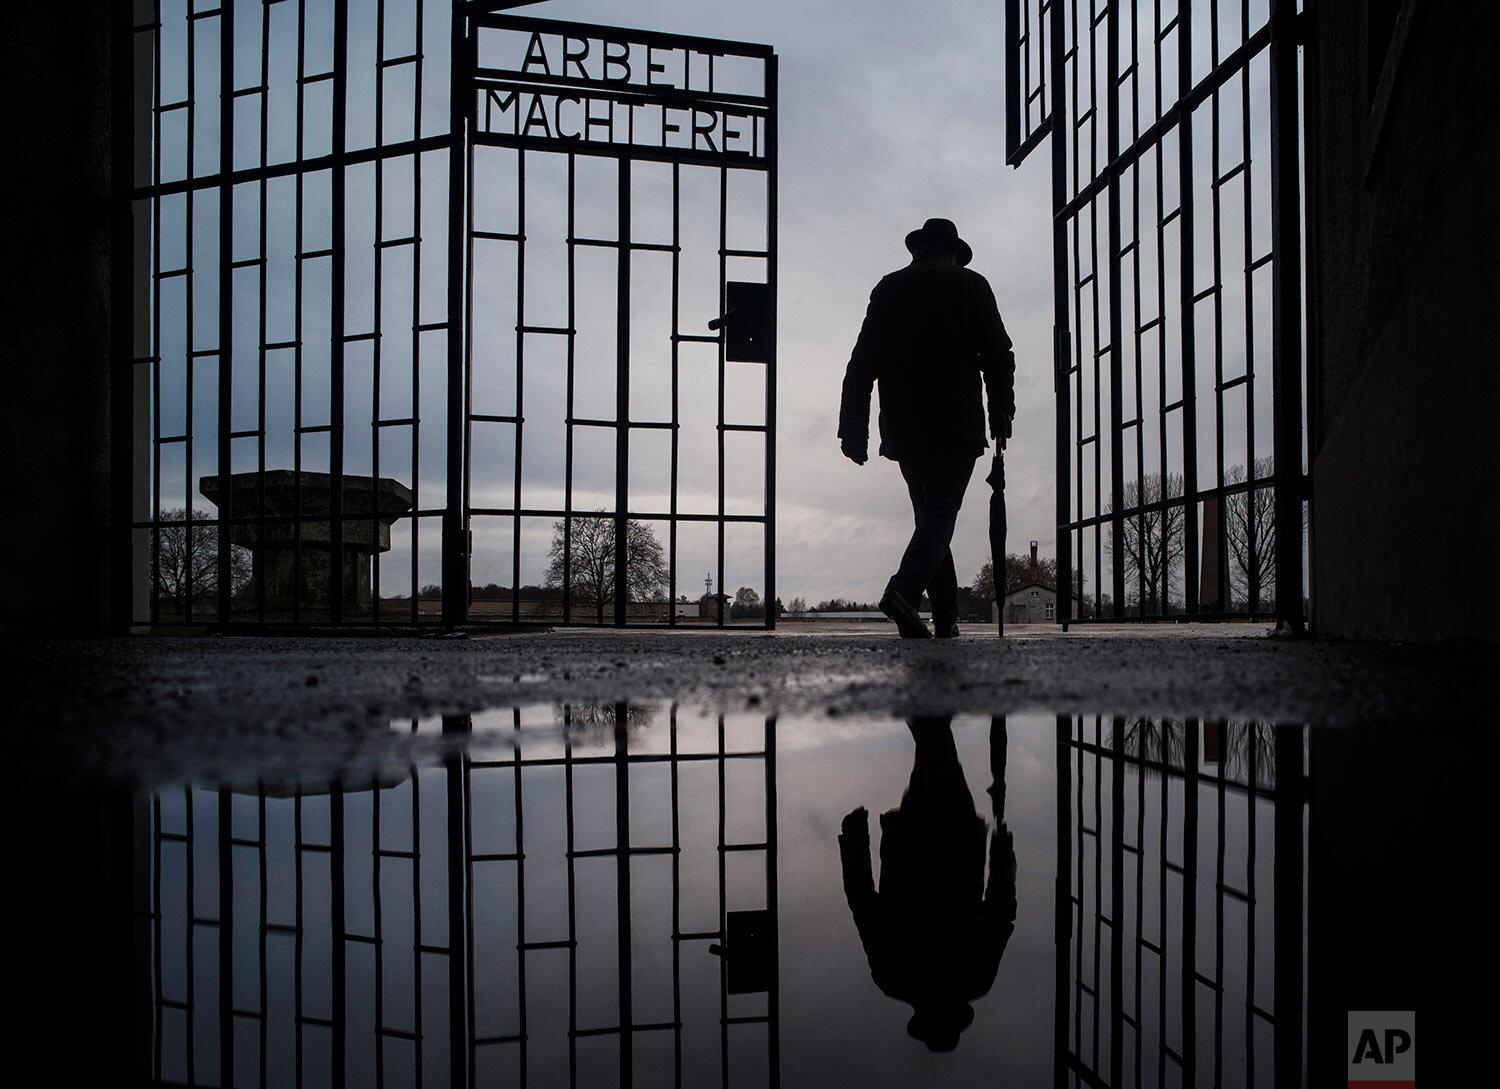  A man walks through the gate of the Sachsenhausen Nazi death camp with the phrase "Arbeit macht frei" (work sets you free) in Oranienburg, Germany, on International Holocaust Remembrance Day, Jan. 27, 2019. (AP Photo/Markus Schreiber) 